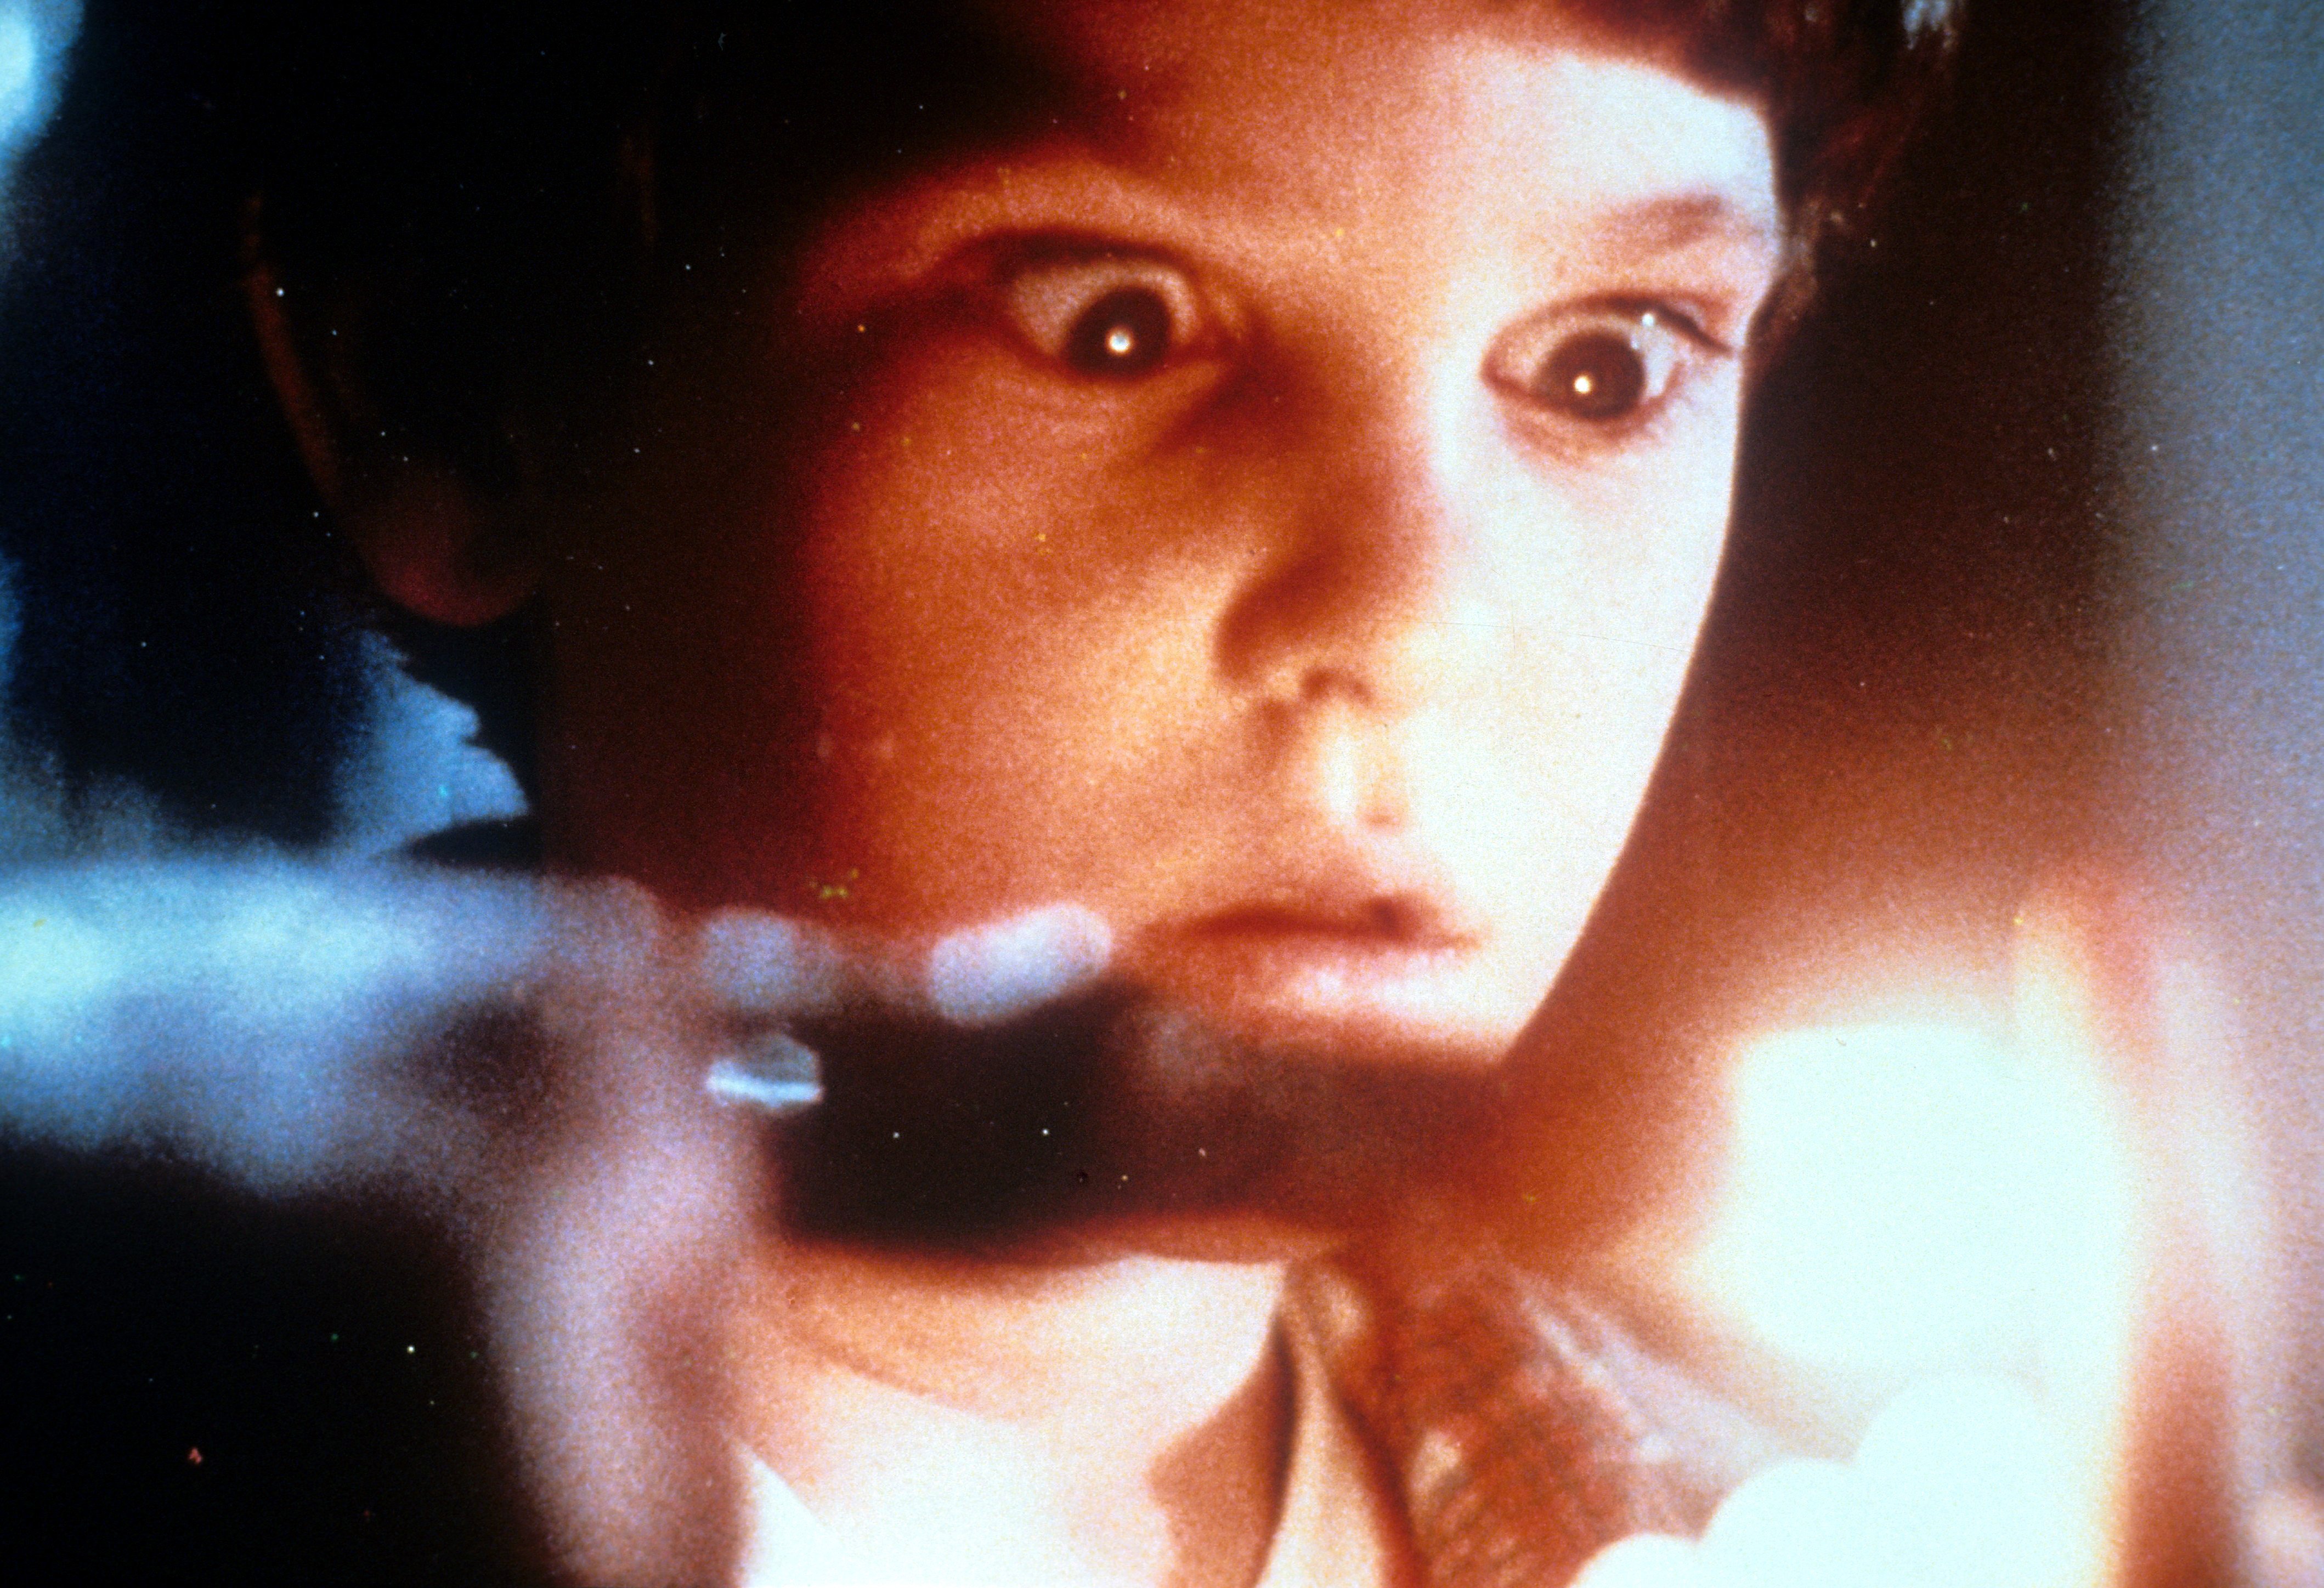 Henry Thomas in a scene from the film “E.T. the Extra-Terrestrial” in 1982. | Source: Getty Images